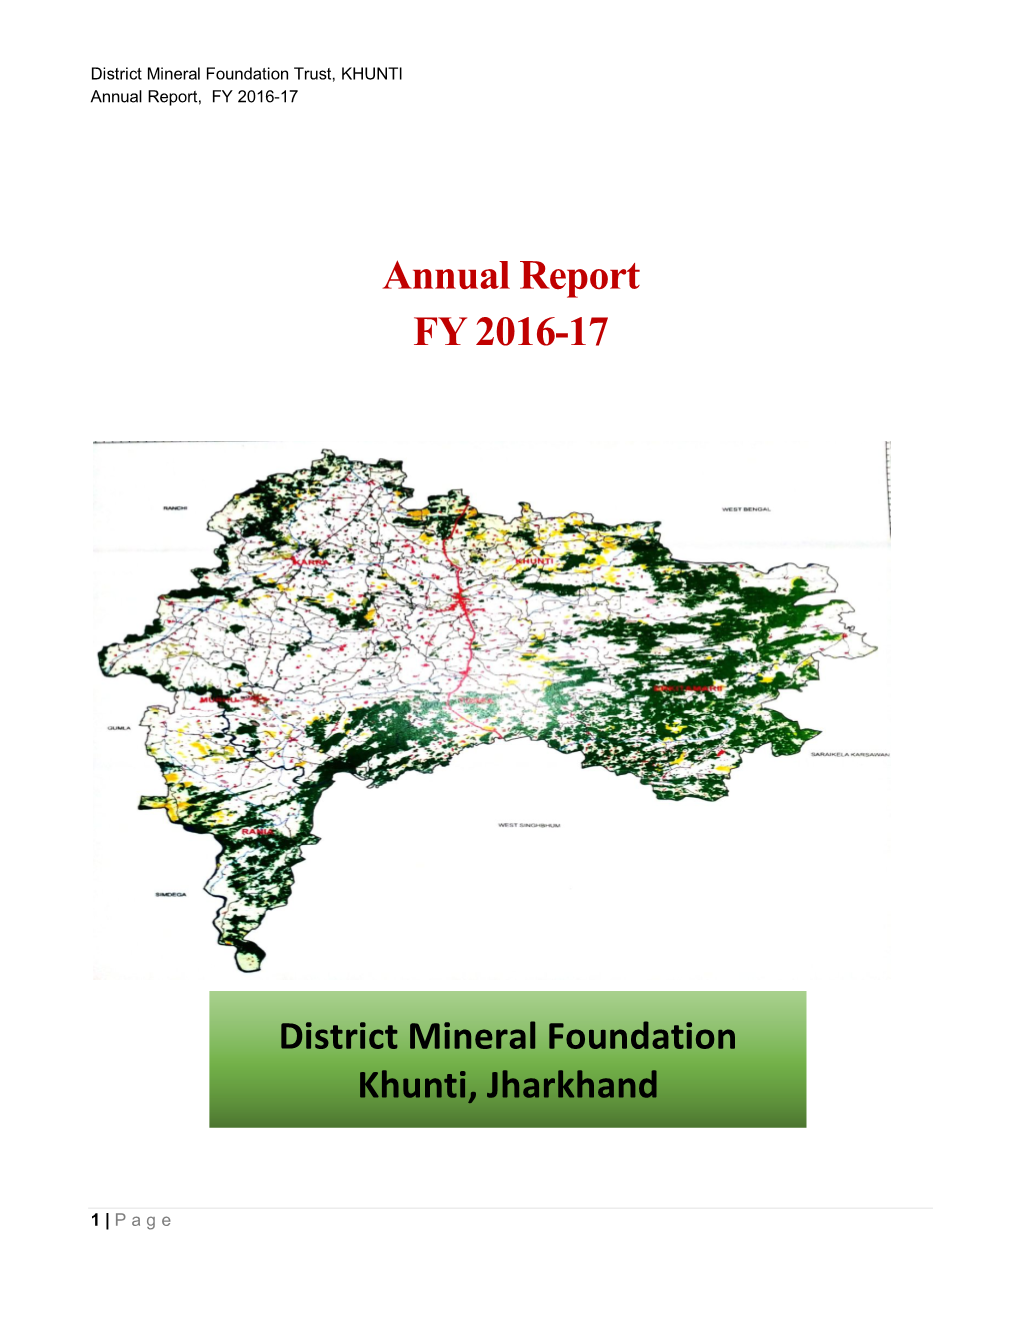 Annual Report FY 2016-17